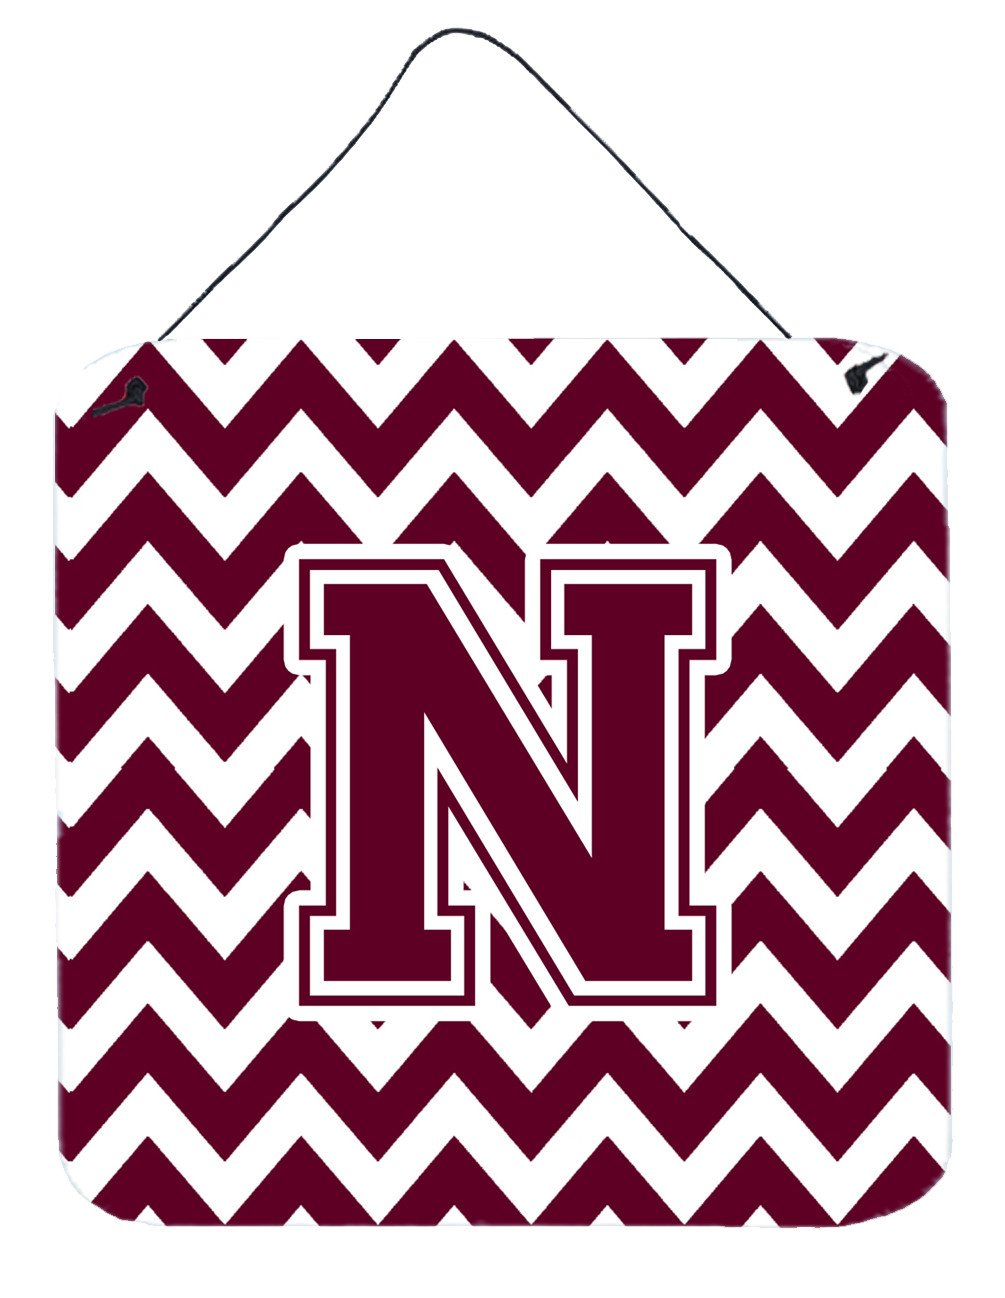 Letter N Chevron Maroon and White  Wall or Door Hanging Prints CJ1051-NDS66 by Caroline's Treasures